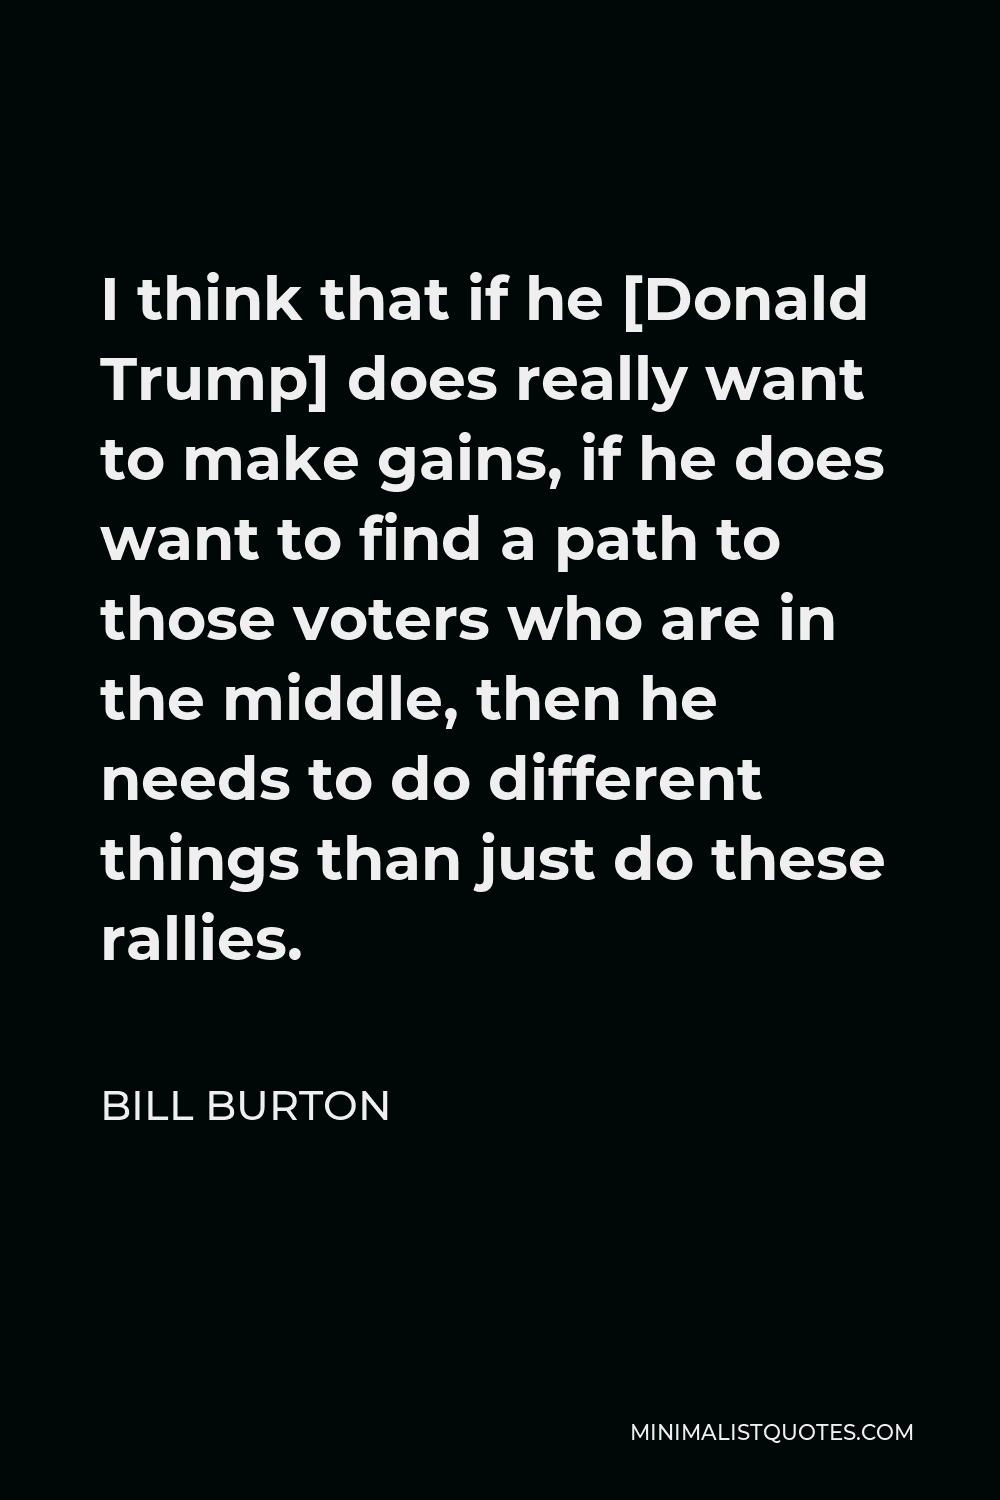 Bill Burton Quote - I think that if he [Donald Trump] does really want to make gains, if he does want to find a path to those voters who are in the middle, then he needs to do different things than just do these rallies.